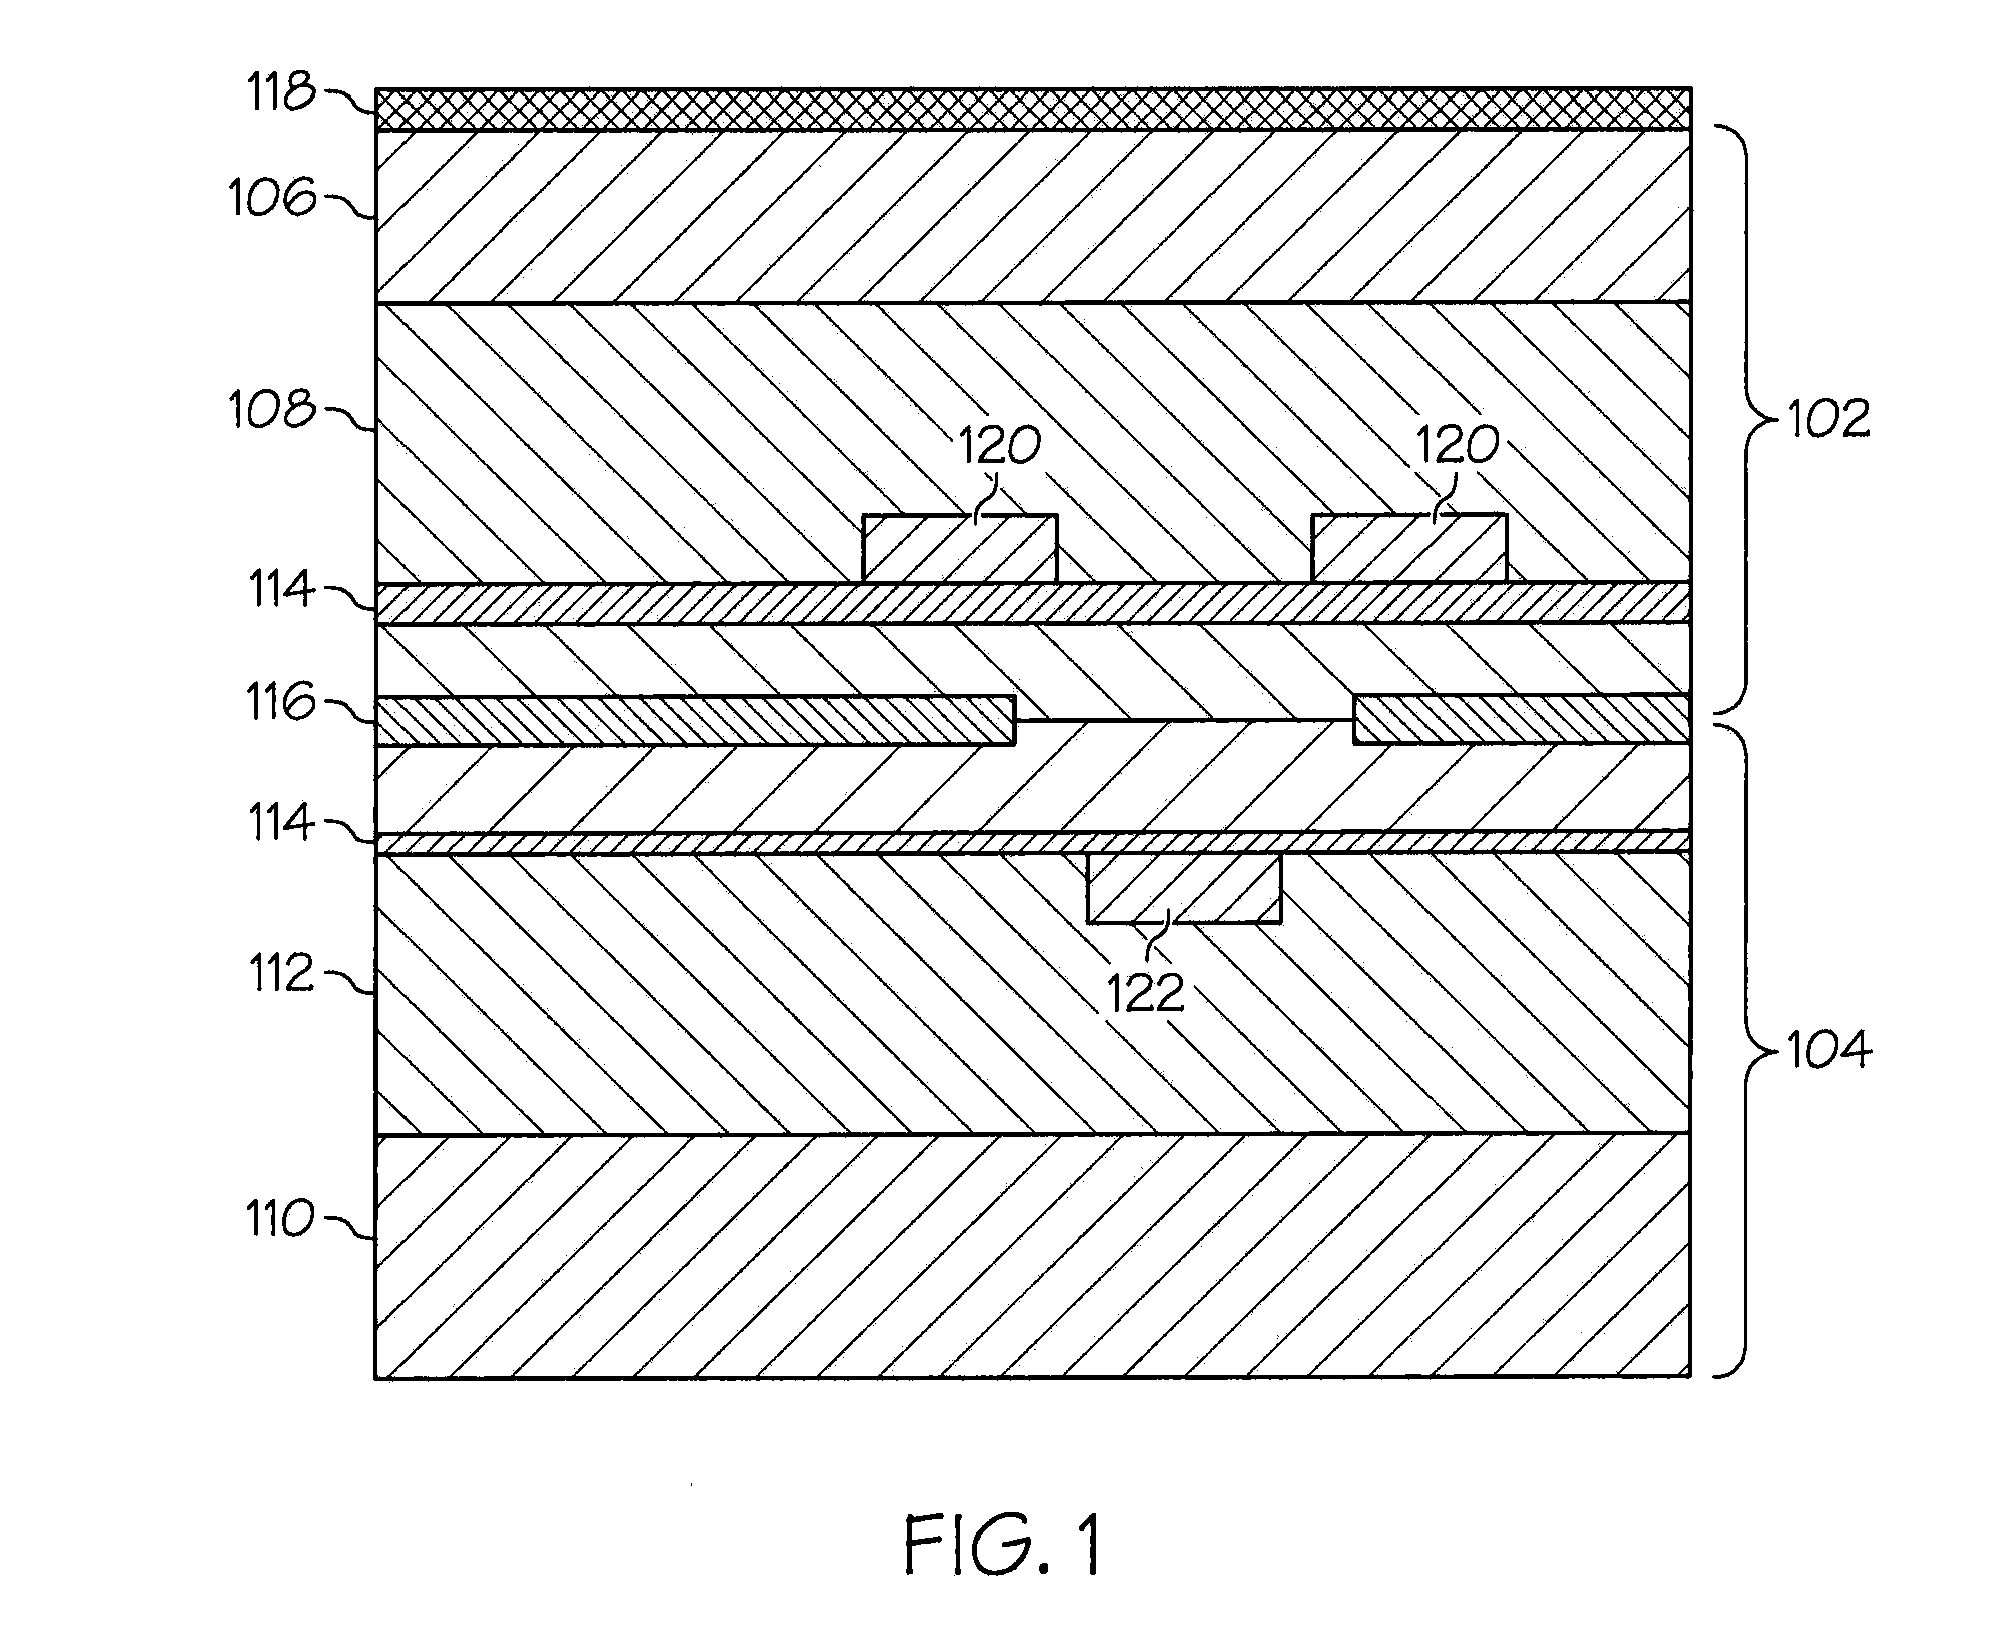 Three Dimensional Integration With Through Silicon Vias Having Multiple Diameters